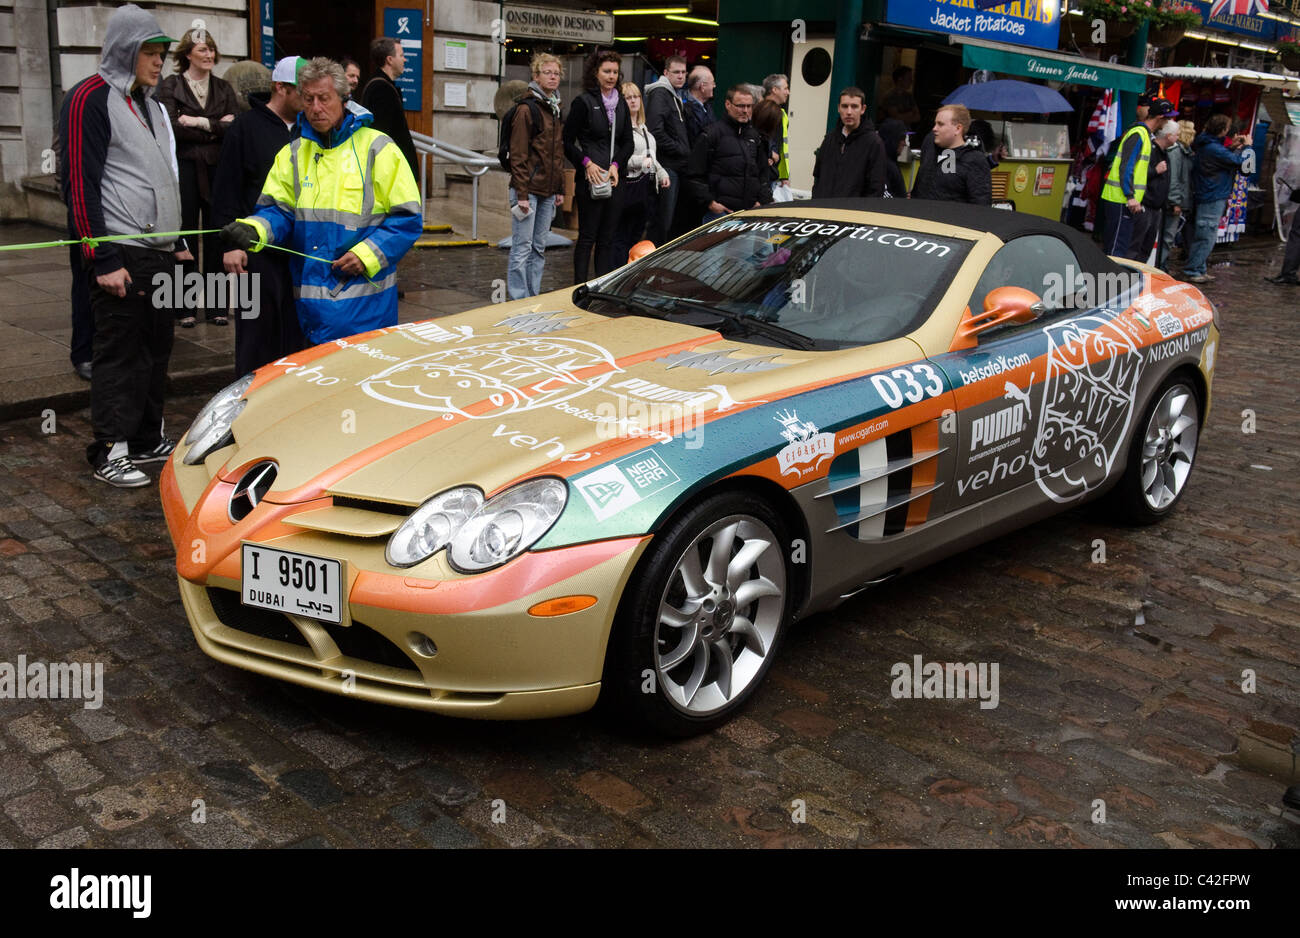 McLaren Mercedes SLR car in a London street at  the start of the Gumball rally 3000. Stock Photo